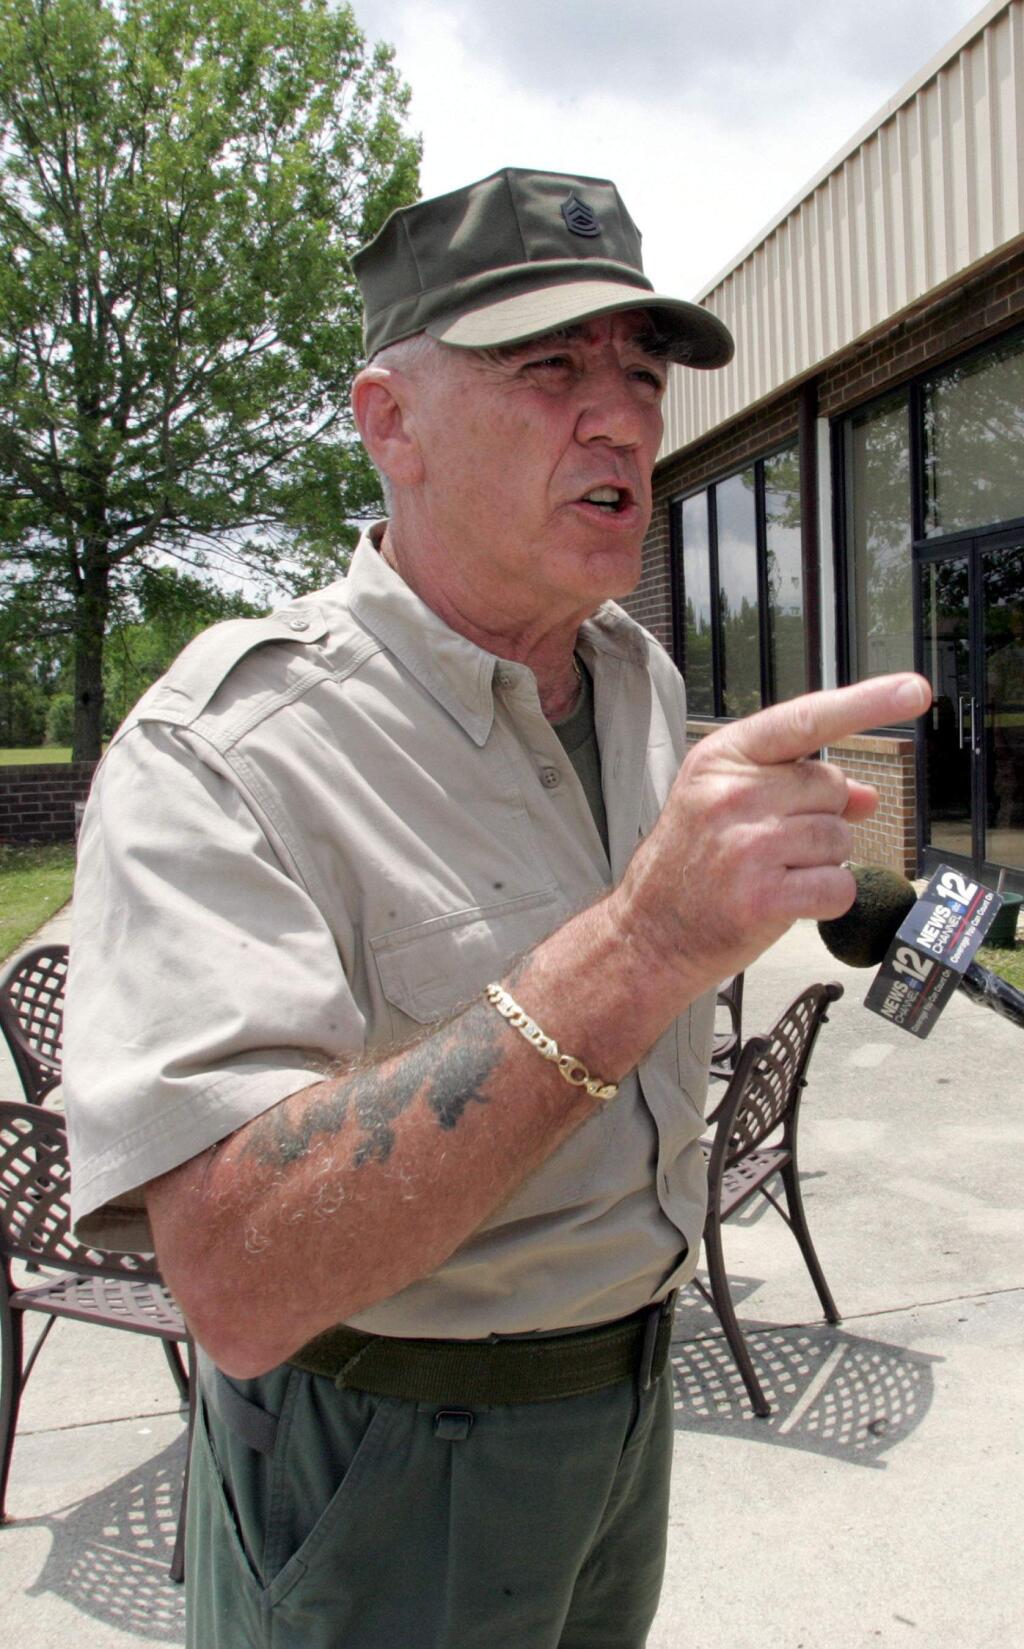 FILE - In this May 15, 2006, file photo, retired Marine Gunnery Sgt. R. Lee Ermey gives a few Marines a show outside New River Air Station's Staff NCO club in Jacksonville, N.C. Ermey, a former marine who made a career in Hollywood playing hard-nosed military men like Gunnery Sgt. Hartman in Stanley Kubrick's 'Full Metal Jacket,' has died. His longtime manager Bill Rogin says he died Sunday morning, April 15, 2018, from pneumonia-related complications. He was 74. (Randy Davey/The Jacksonville Daily News via AP, File)